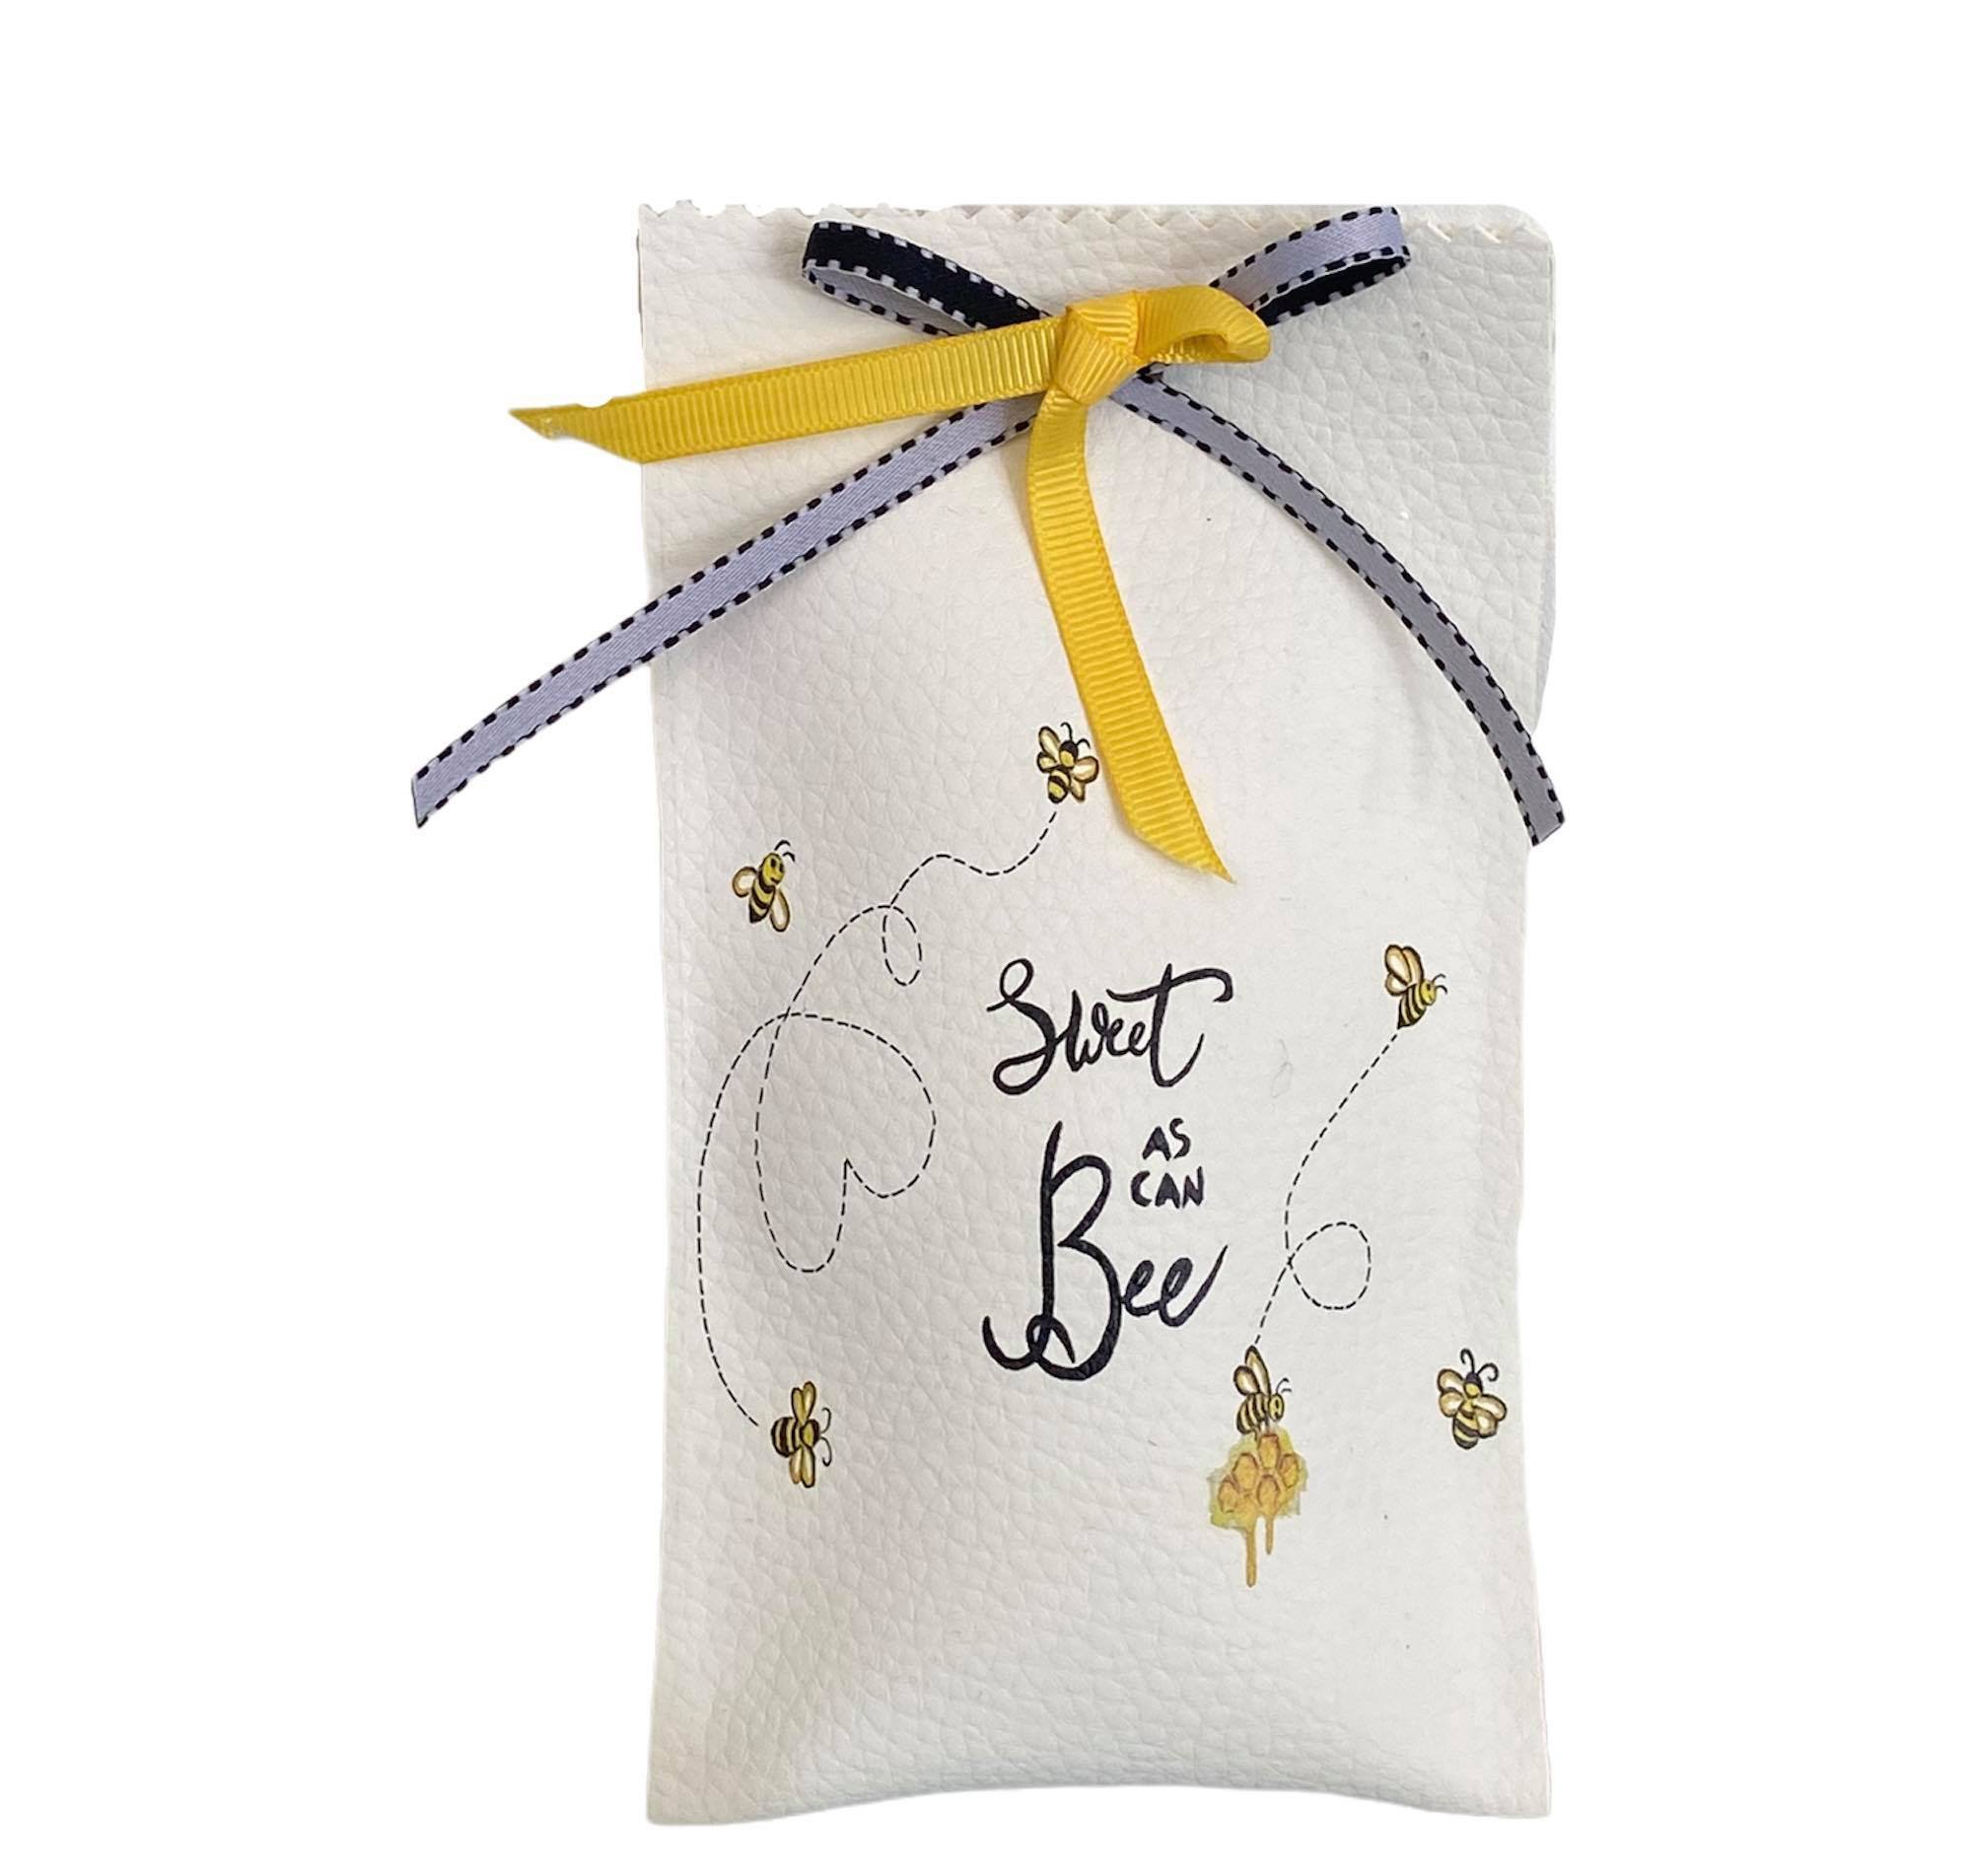 Bonbonniere leather glasses case with bees